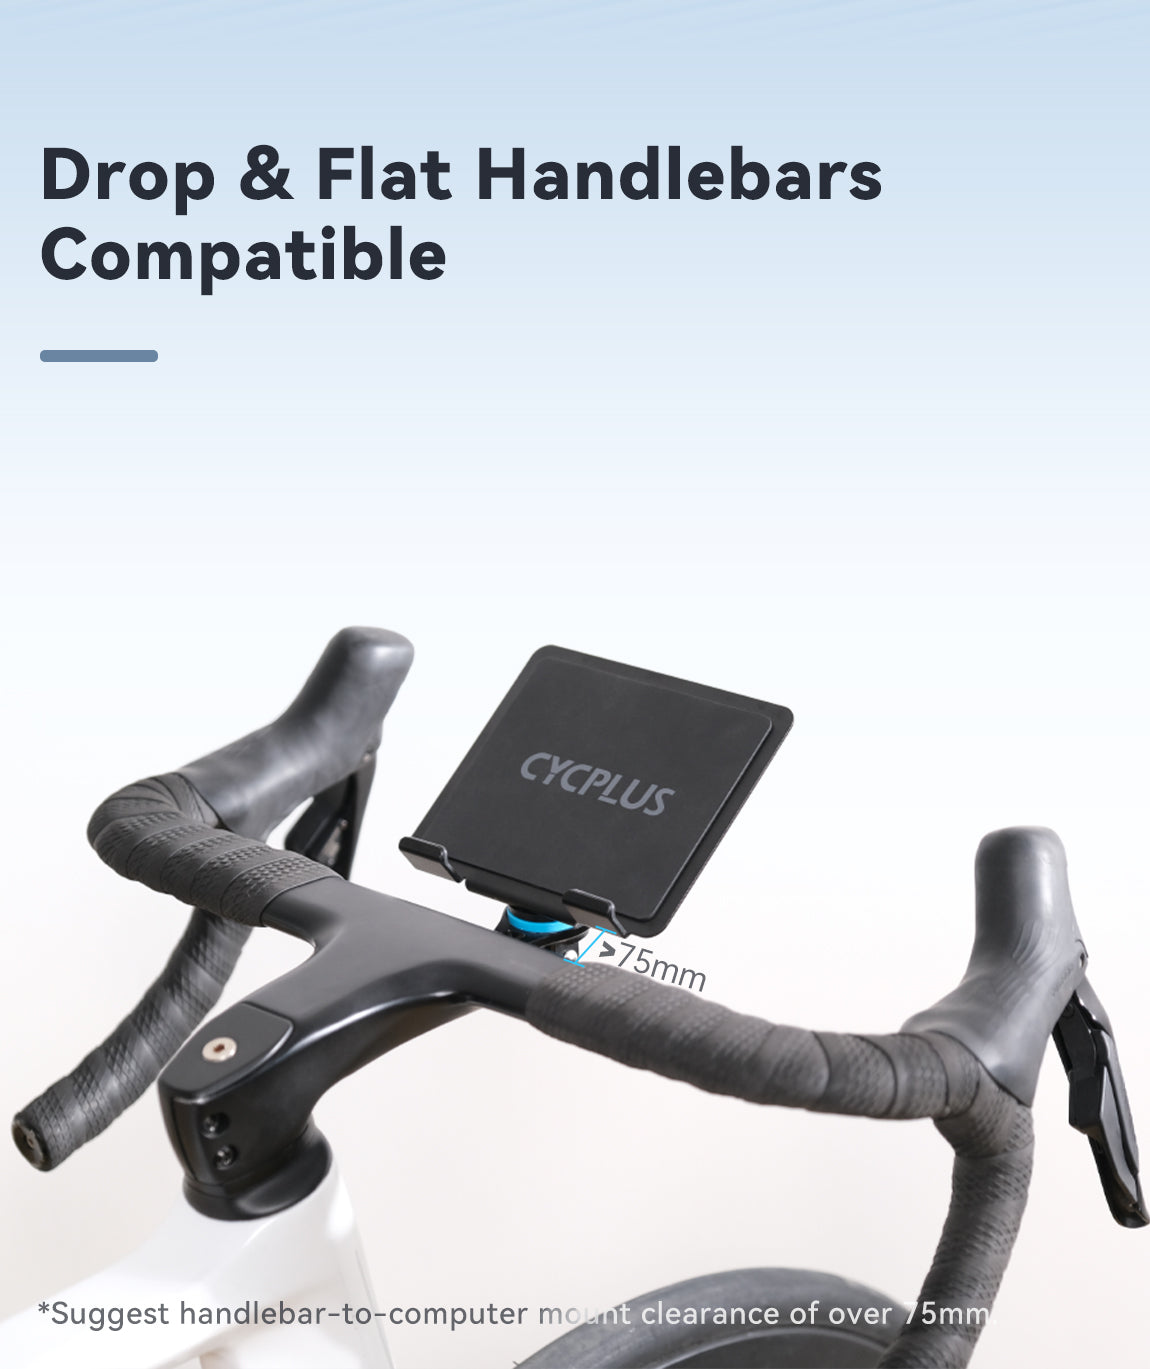 Drop & Flat Handlebars Compatible  *Suggest handlebar-to-computer mount clearance of over 75mm.